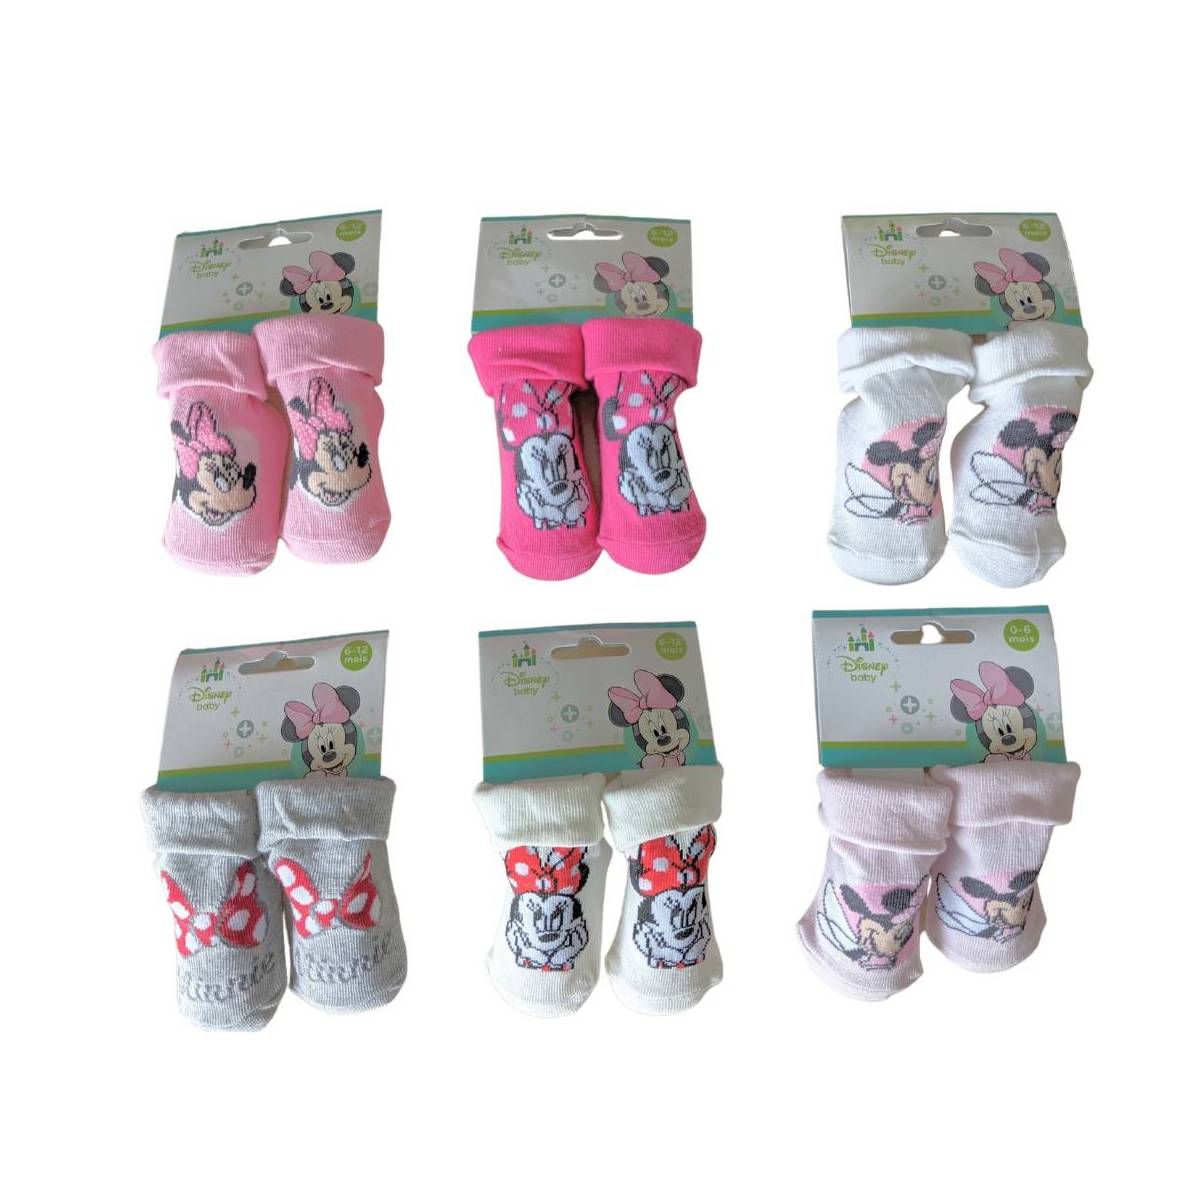 Minnie socks 0 to 6 months and 6 to 12 months